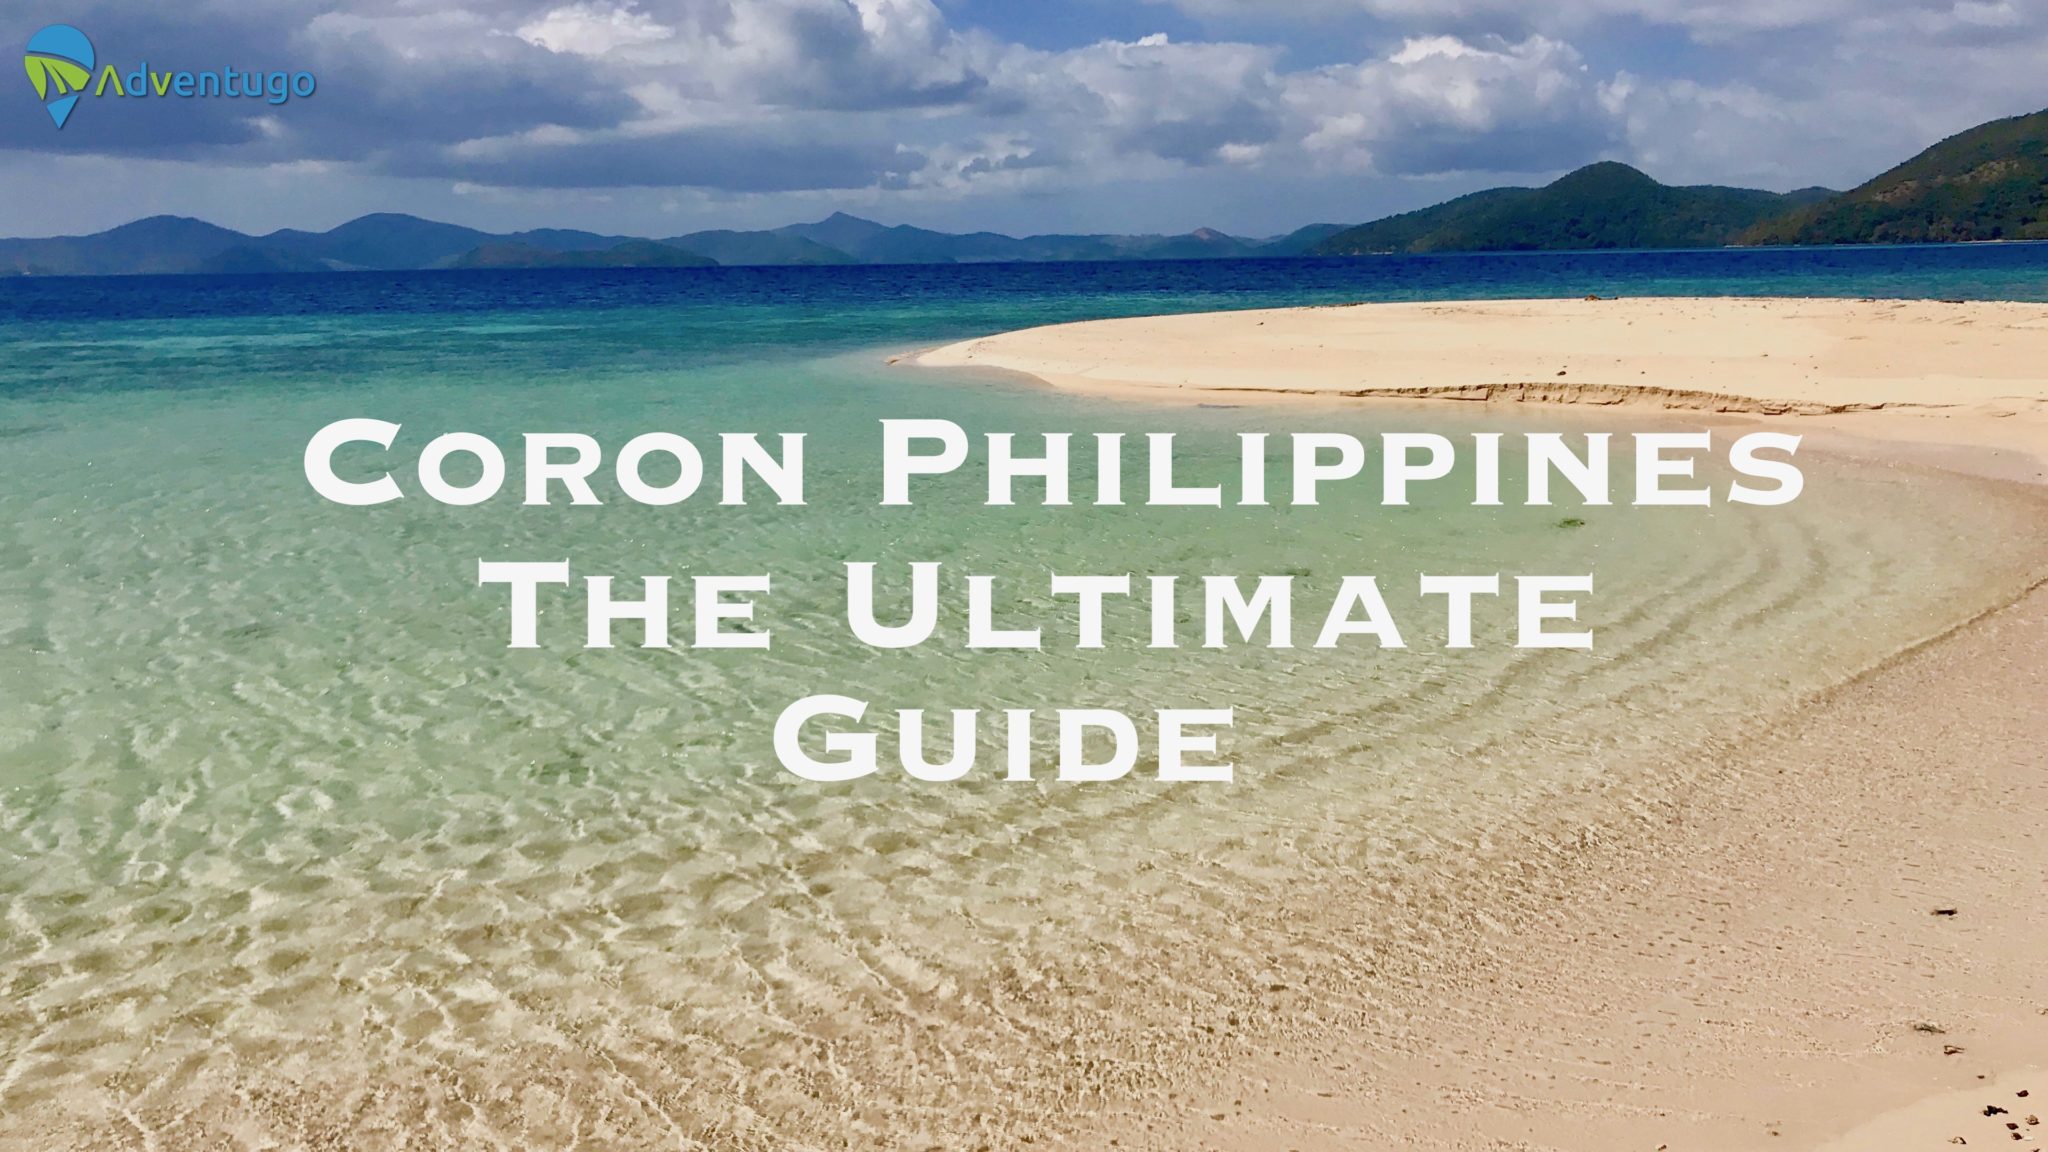 Coron Philippines, The Ultimate Guide